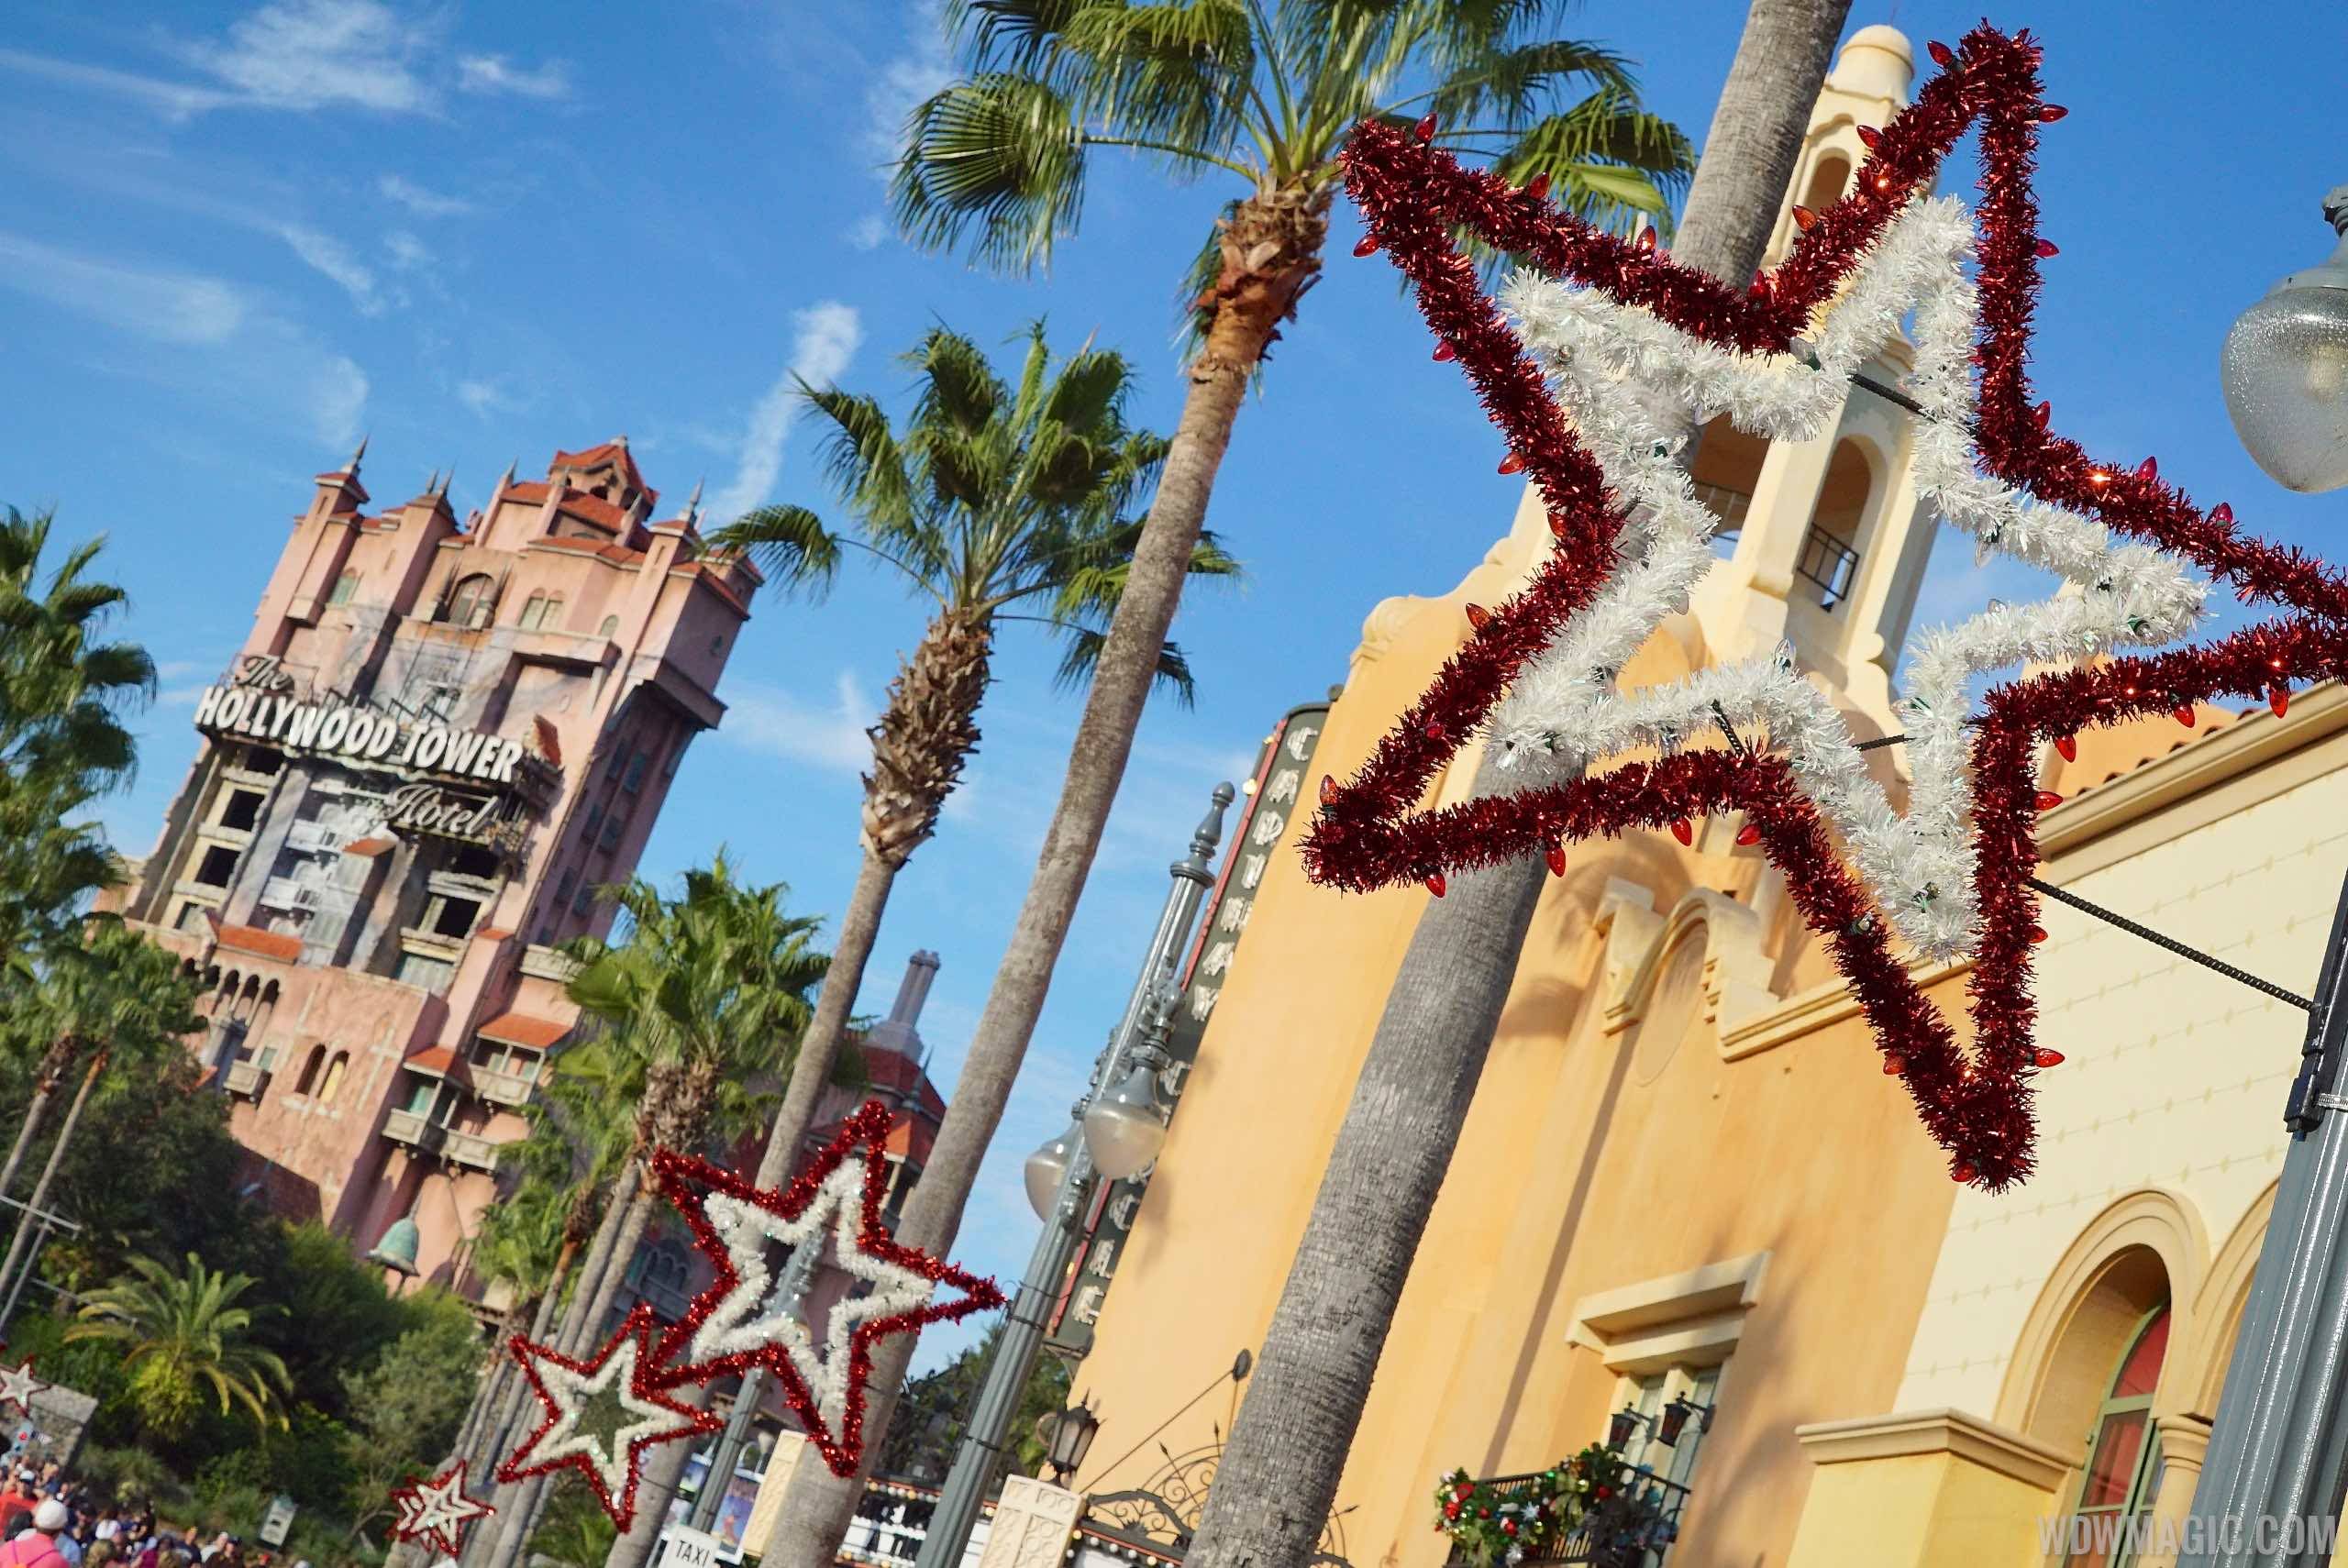 The Comedy Warehouse Holiday Special starts today at Disney's Hollywood Studios